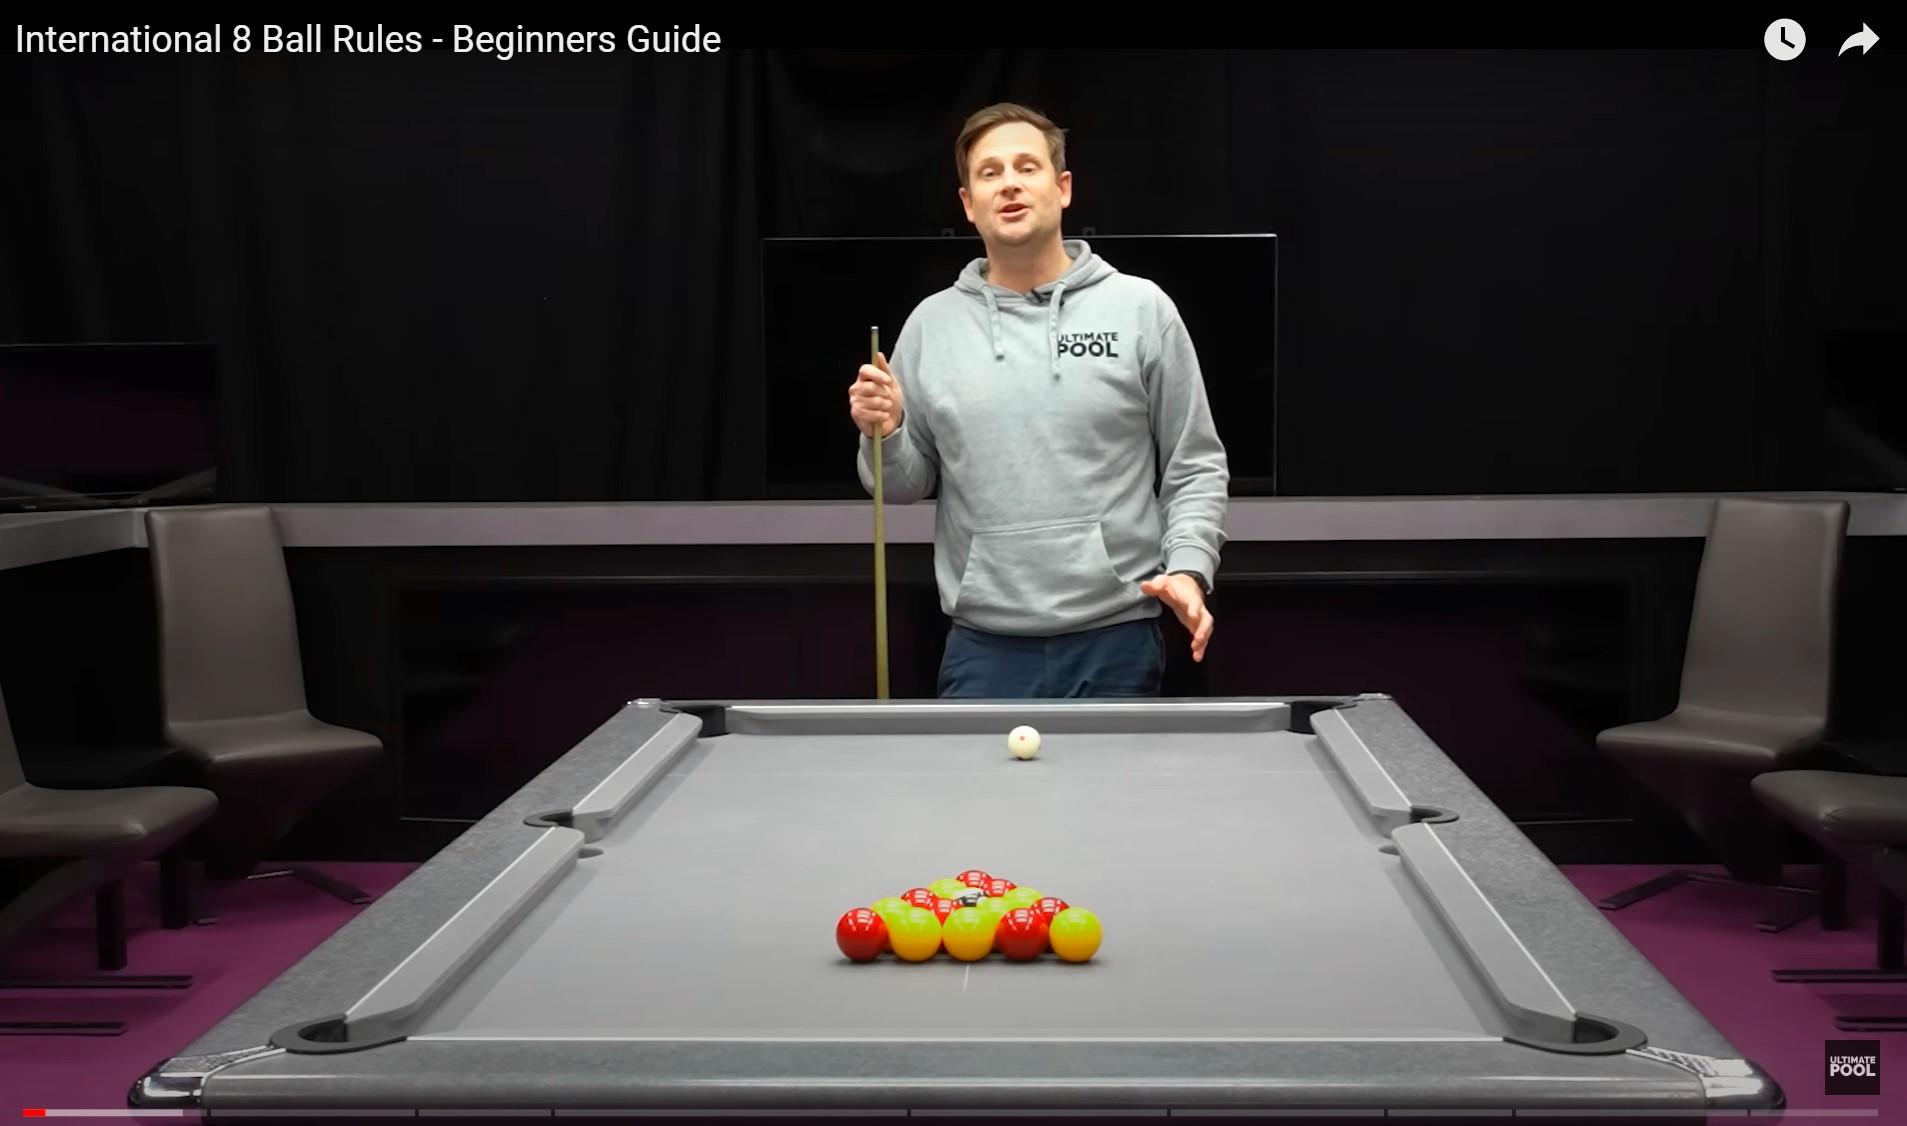 8 BALLS GAME RULES